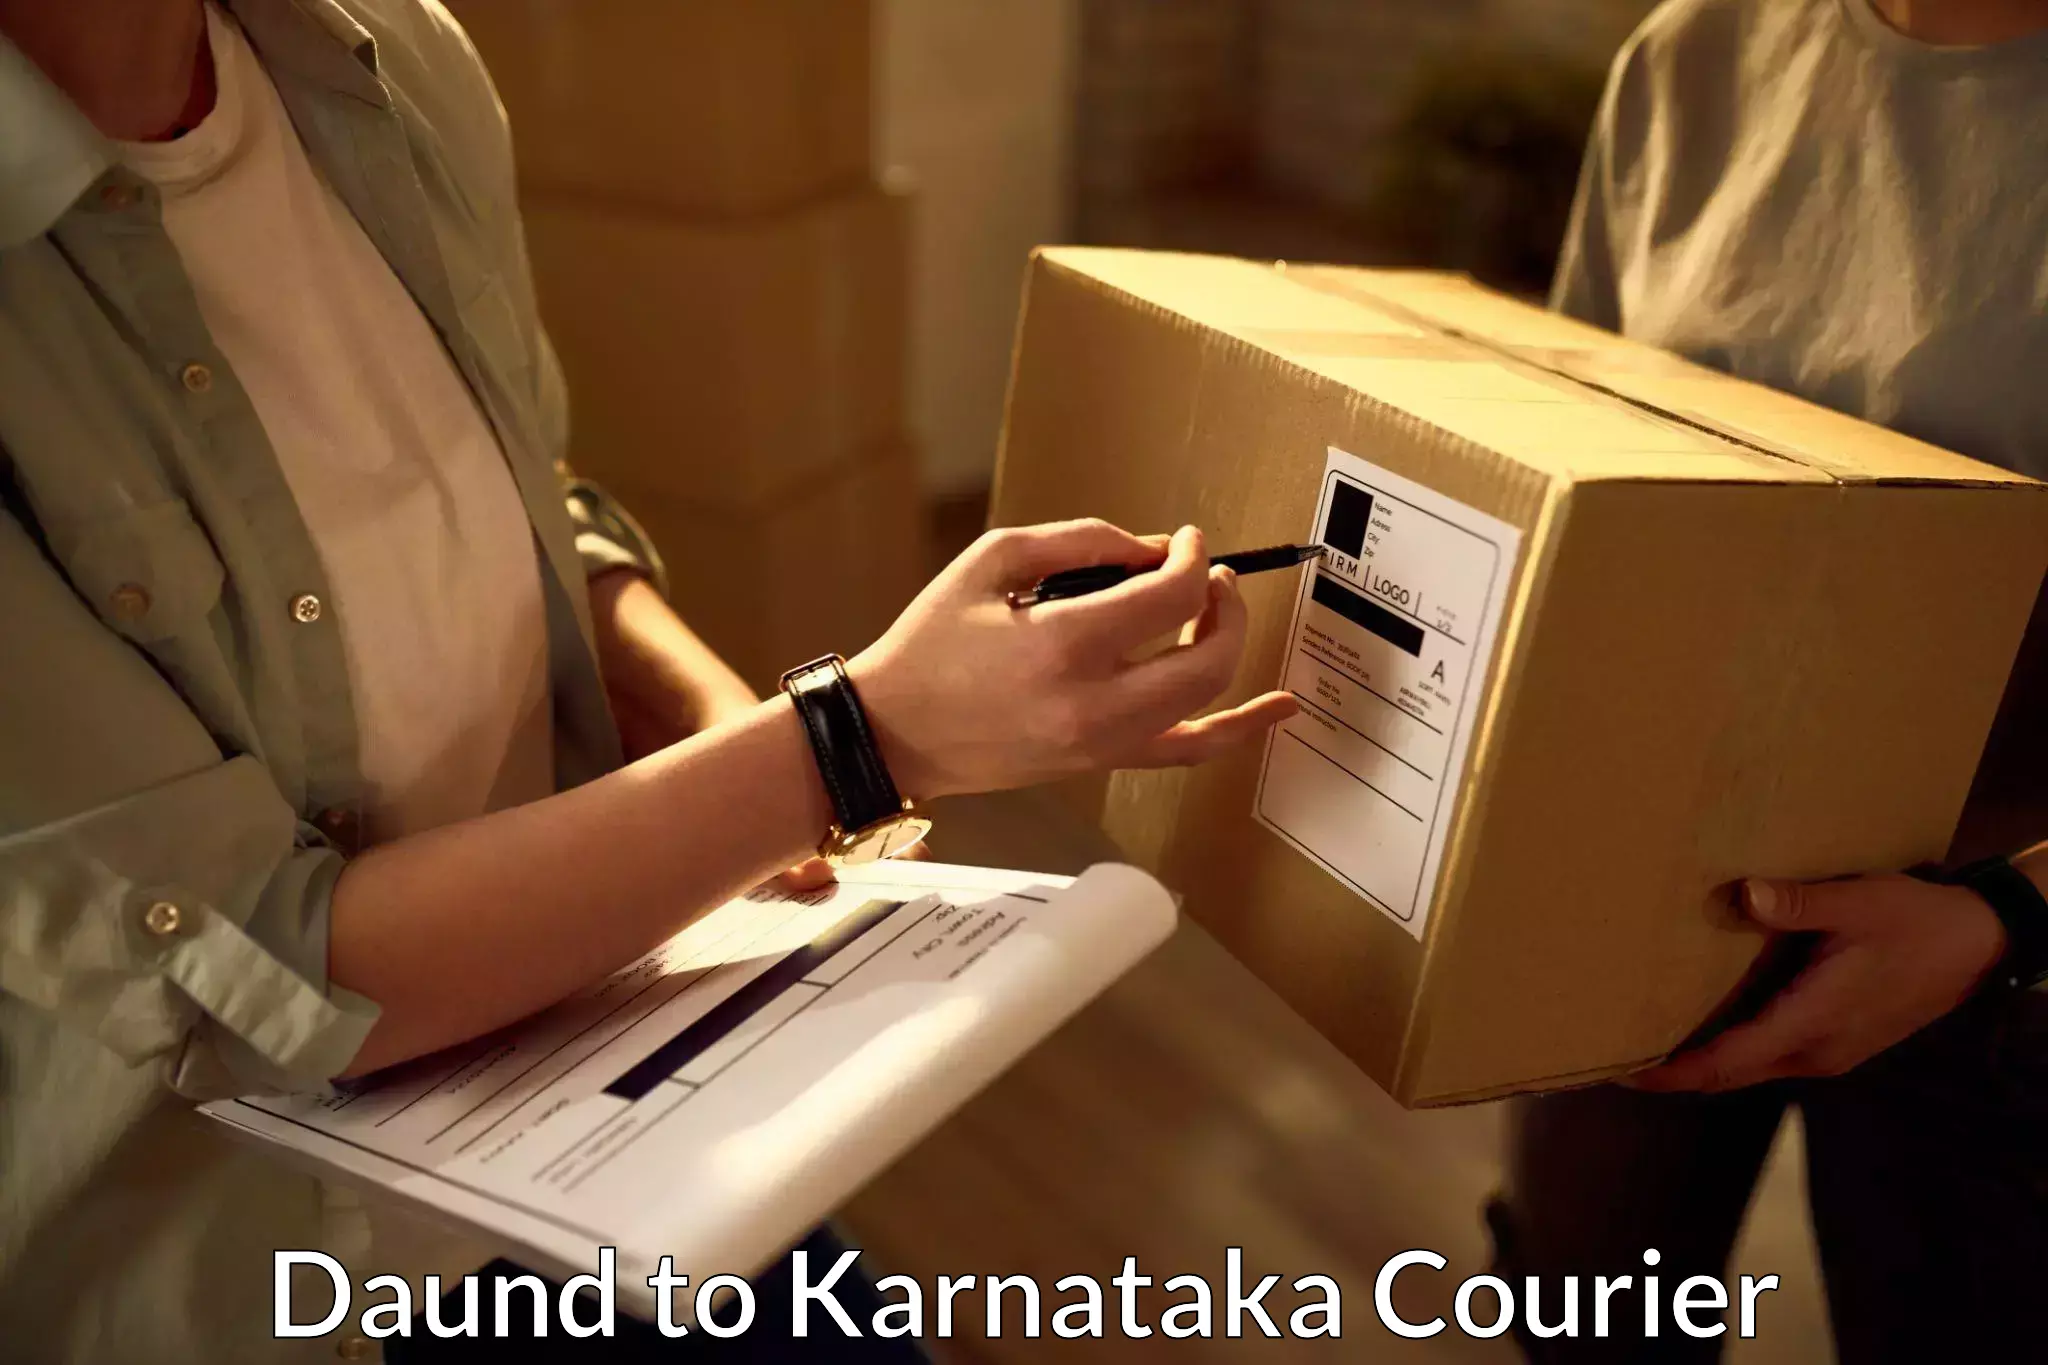 Bulk courier orders in Daund to Bangalore